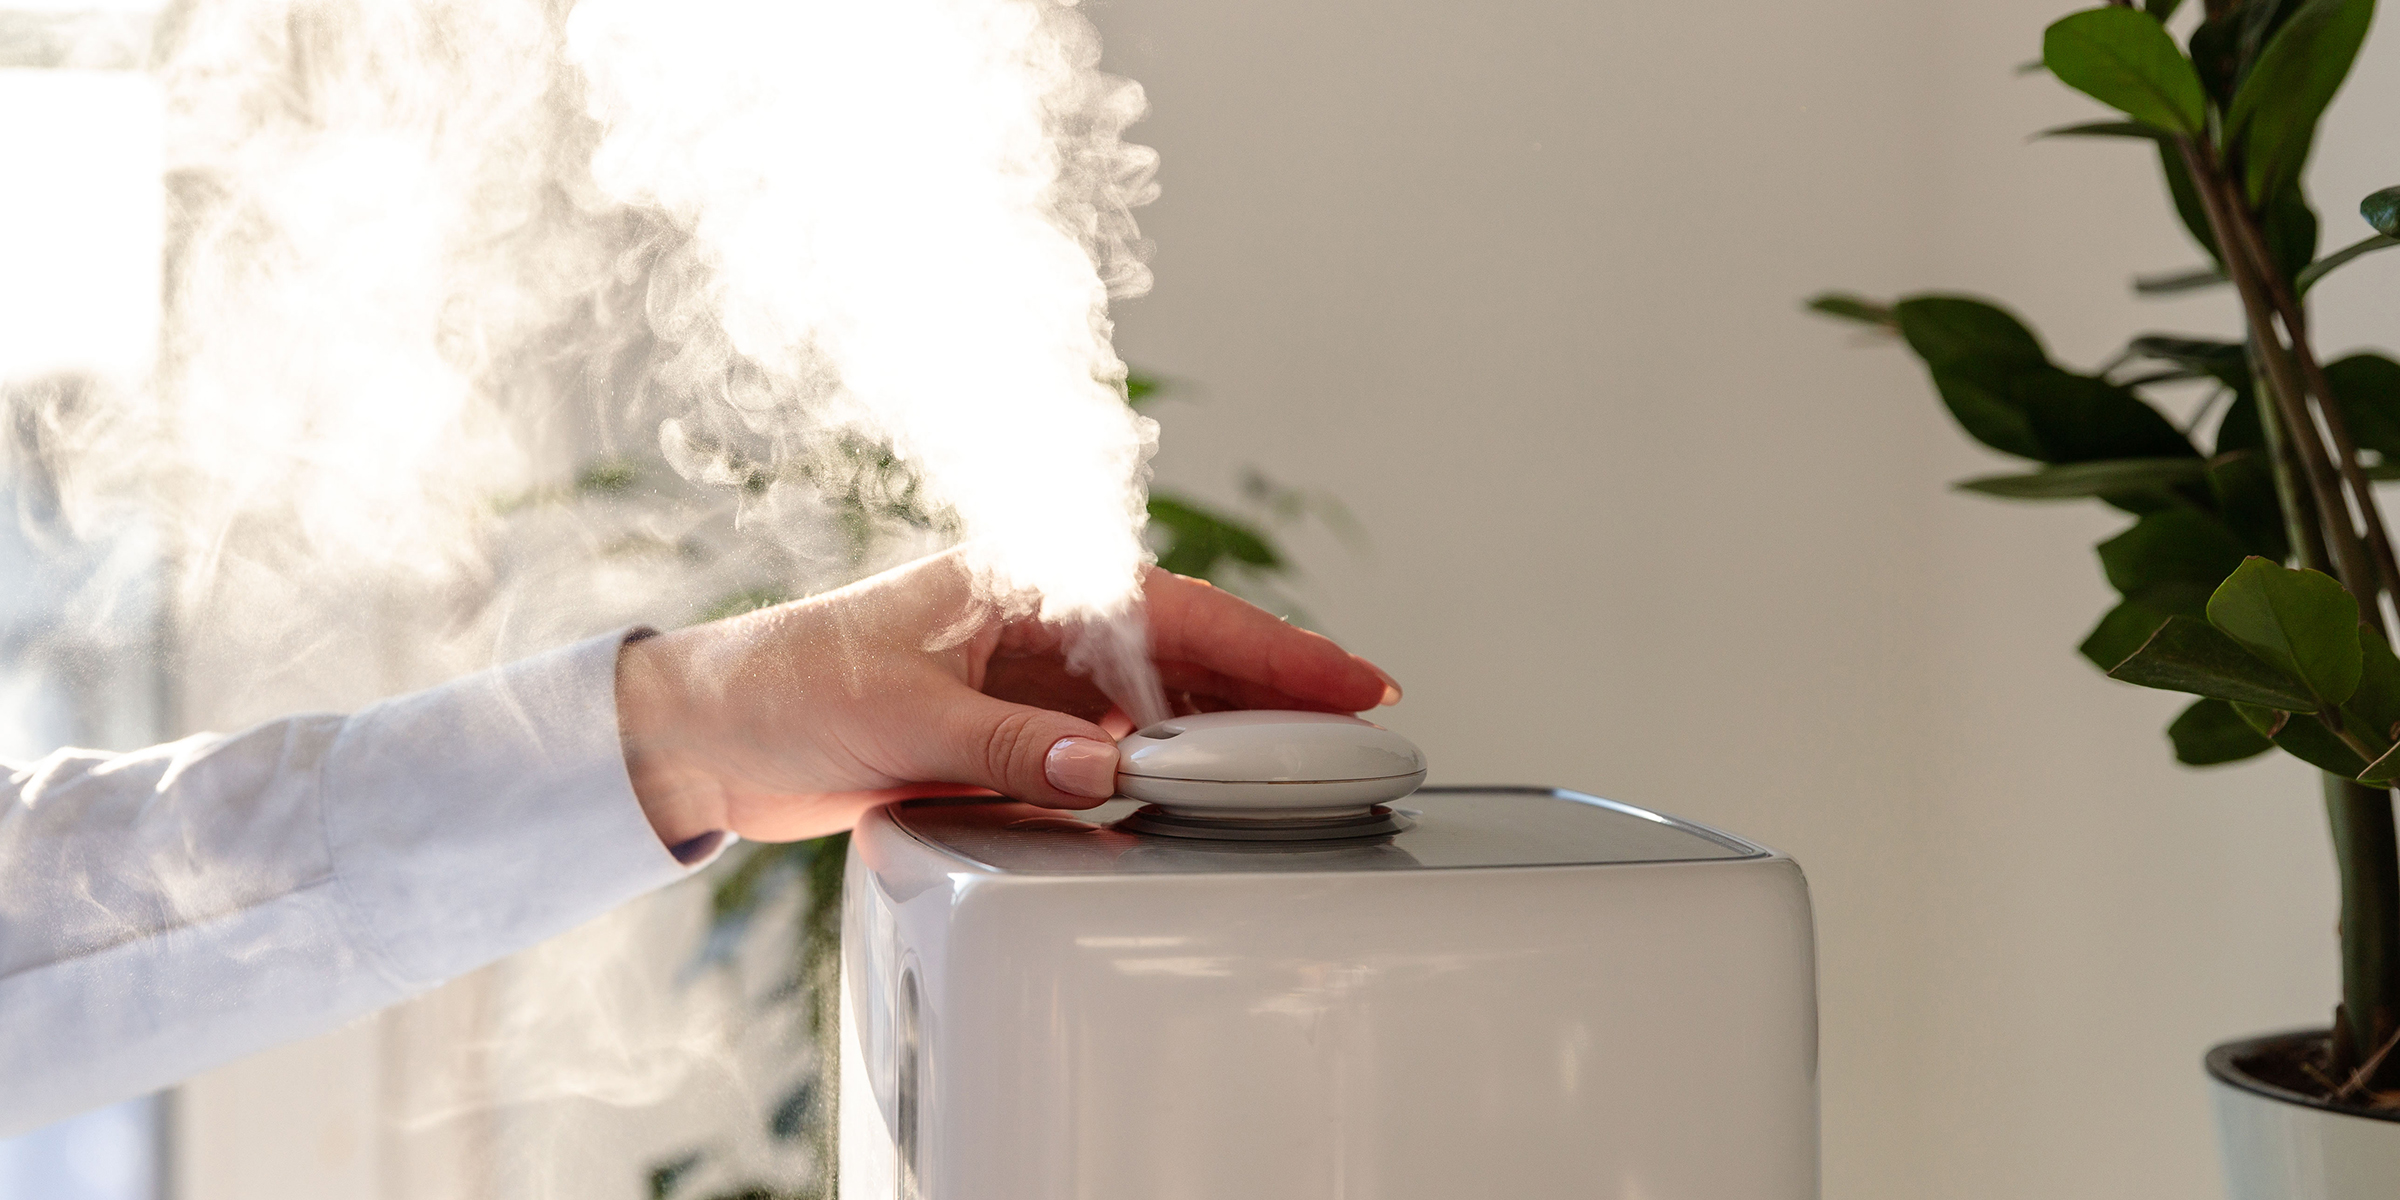 What Is the Difference Between a Humidifier and a Dehumidifier?